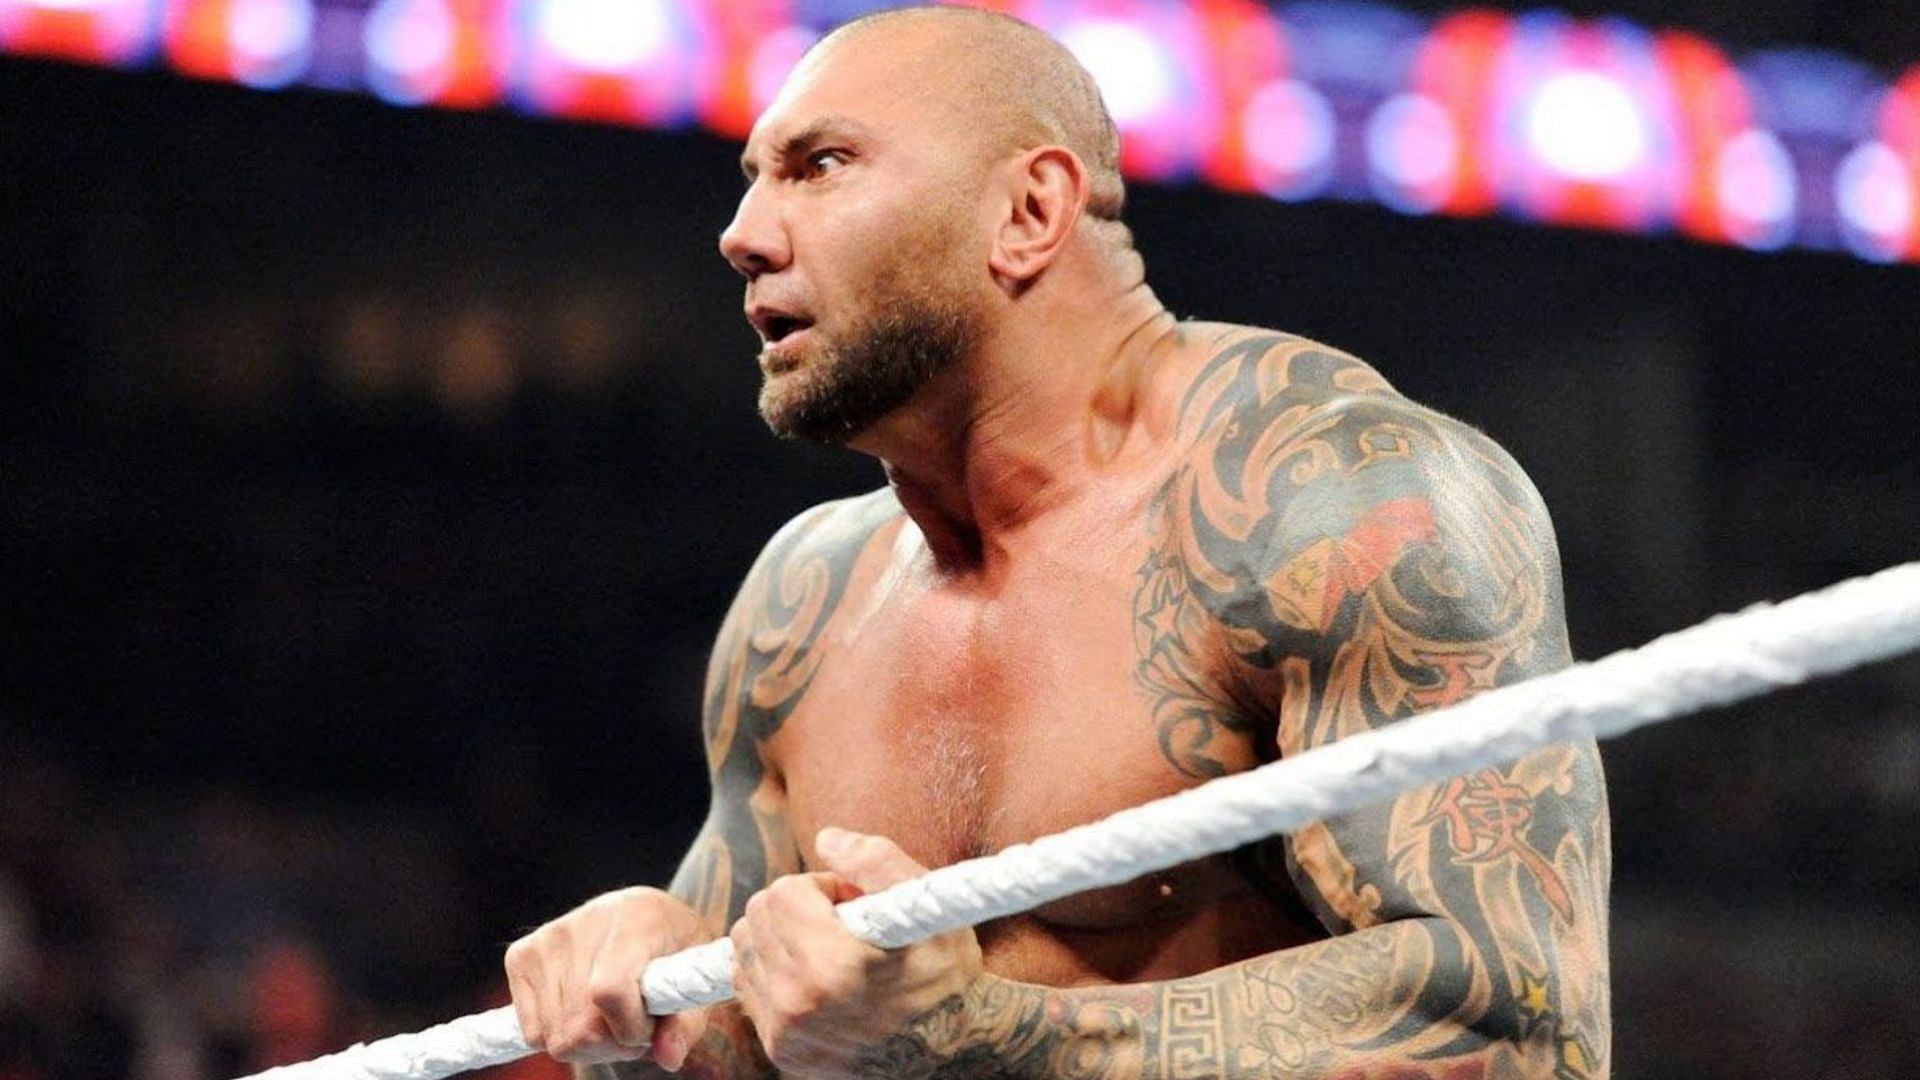 Batista retired from in-ring competition in 2019